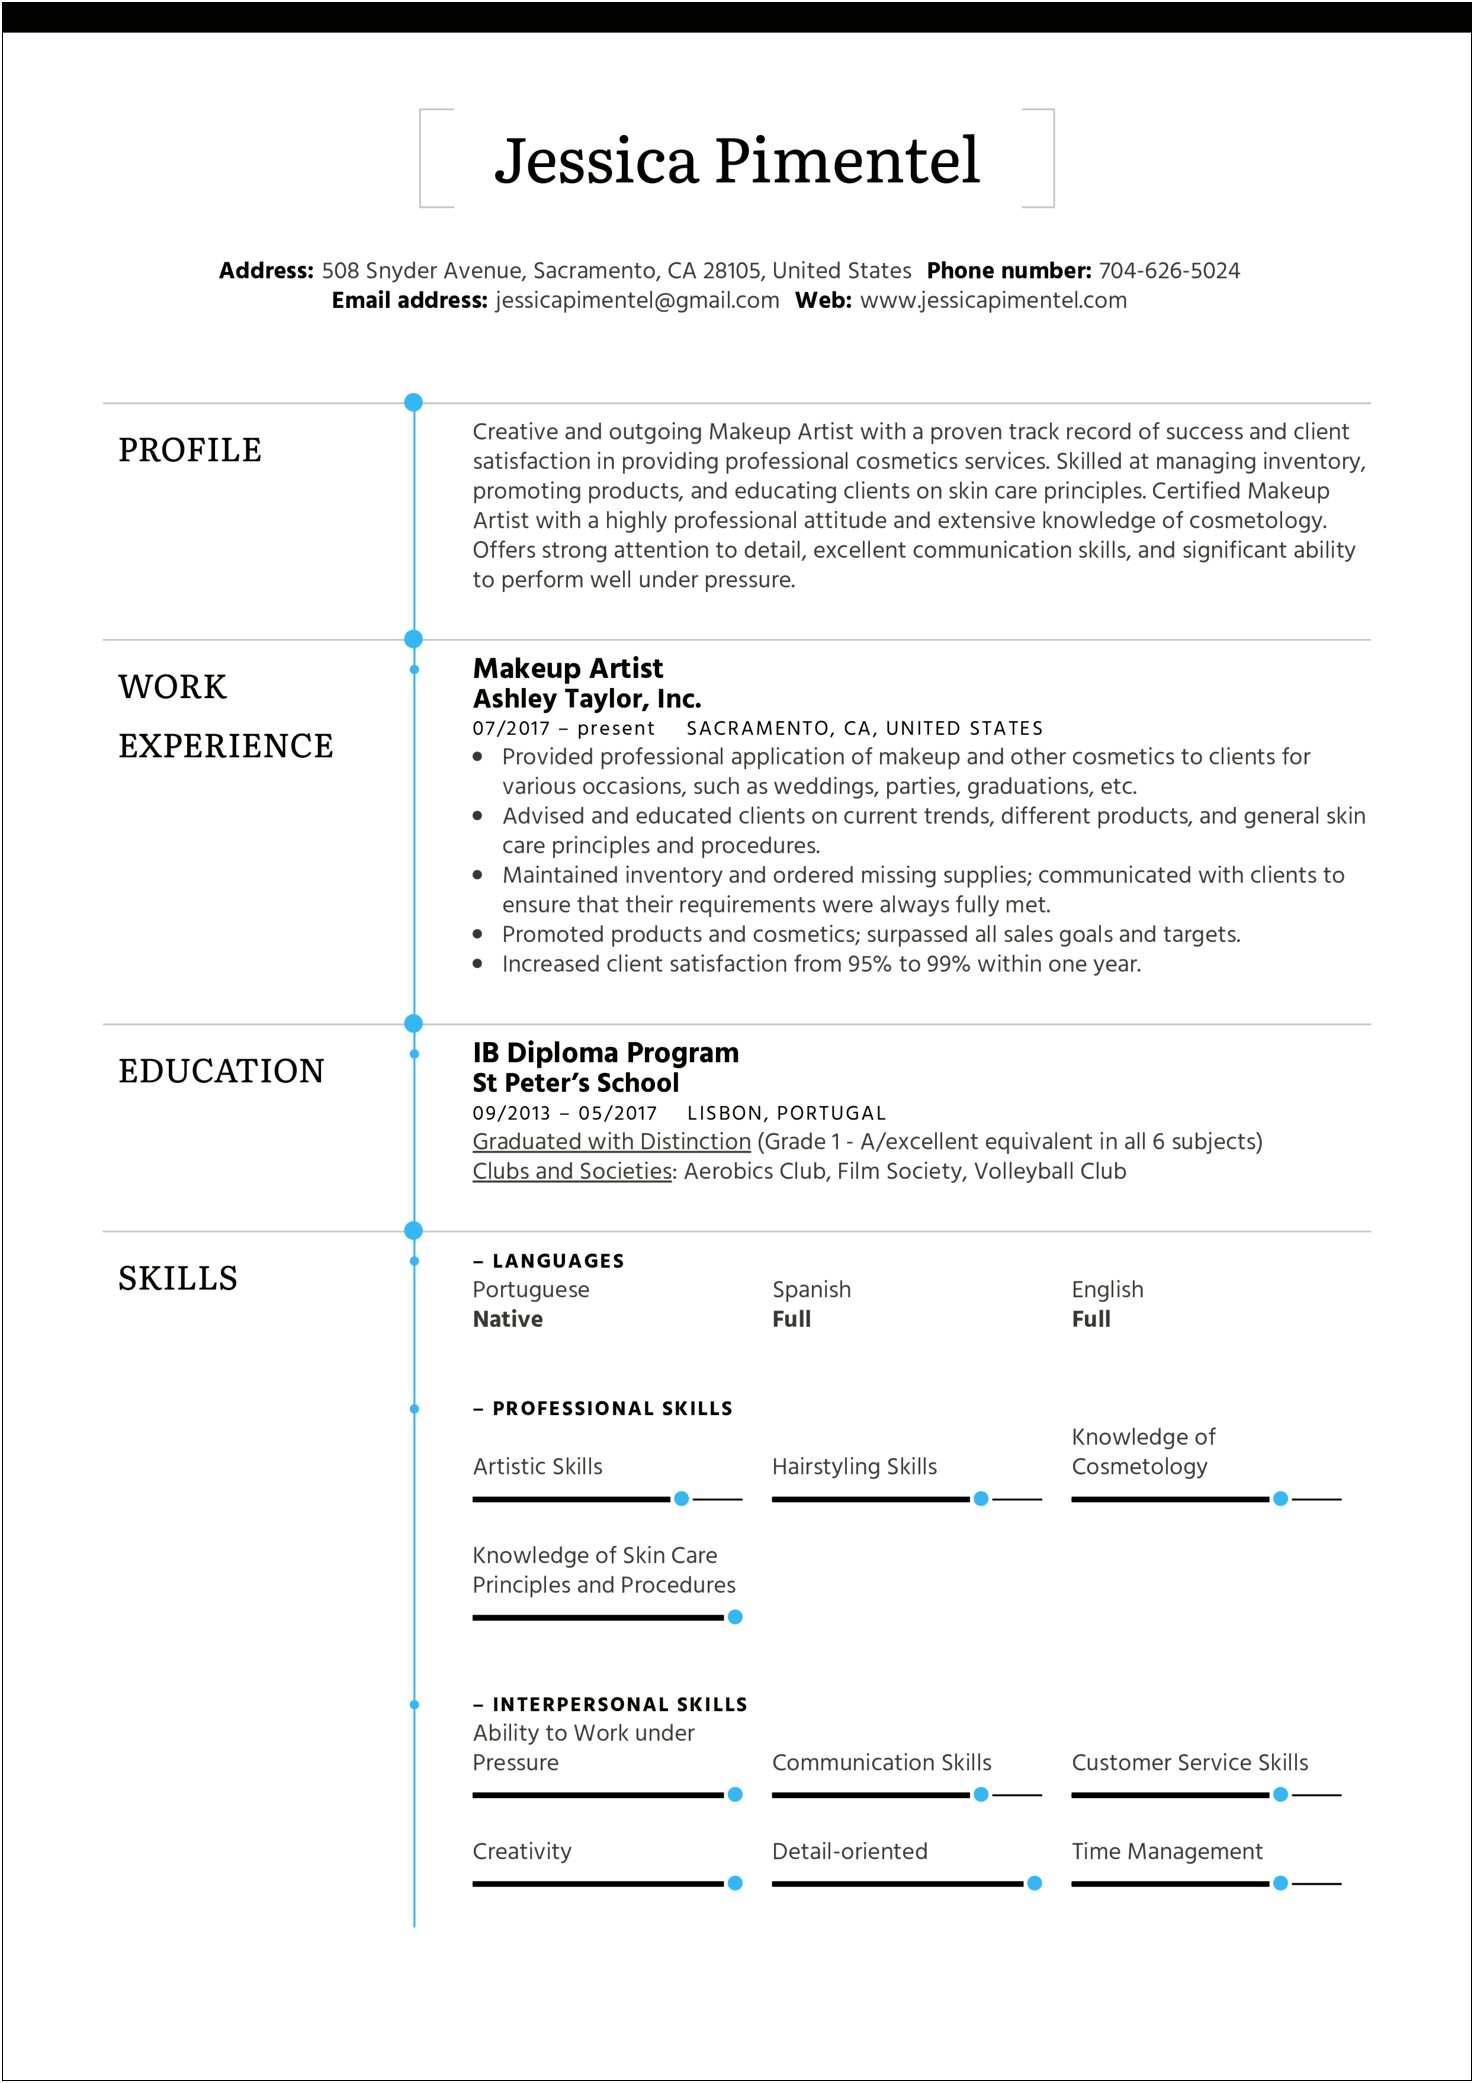 Resume Samples With Skills And Abilities